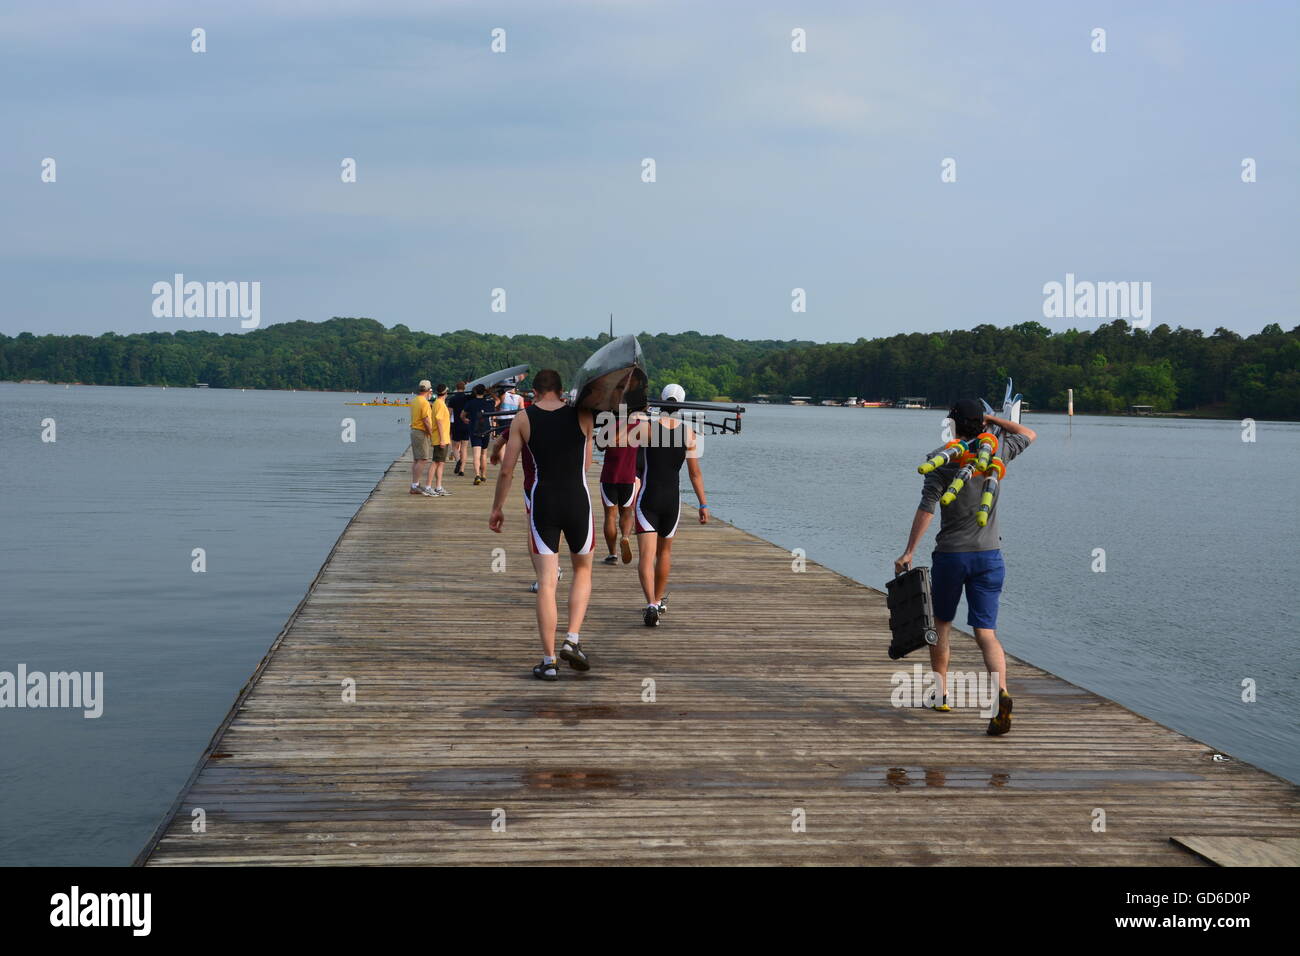 Men's college rowing team carry a boat down the dock to launch for a regatta at Atlanta's former Olympic site at Lake Lanier in 2014. Stock Photo